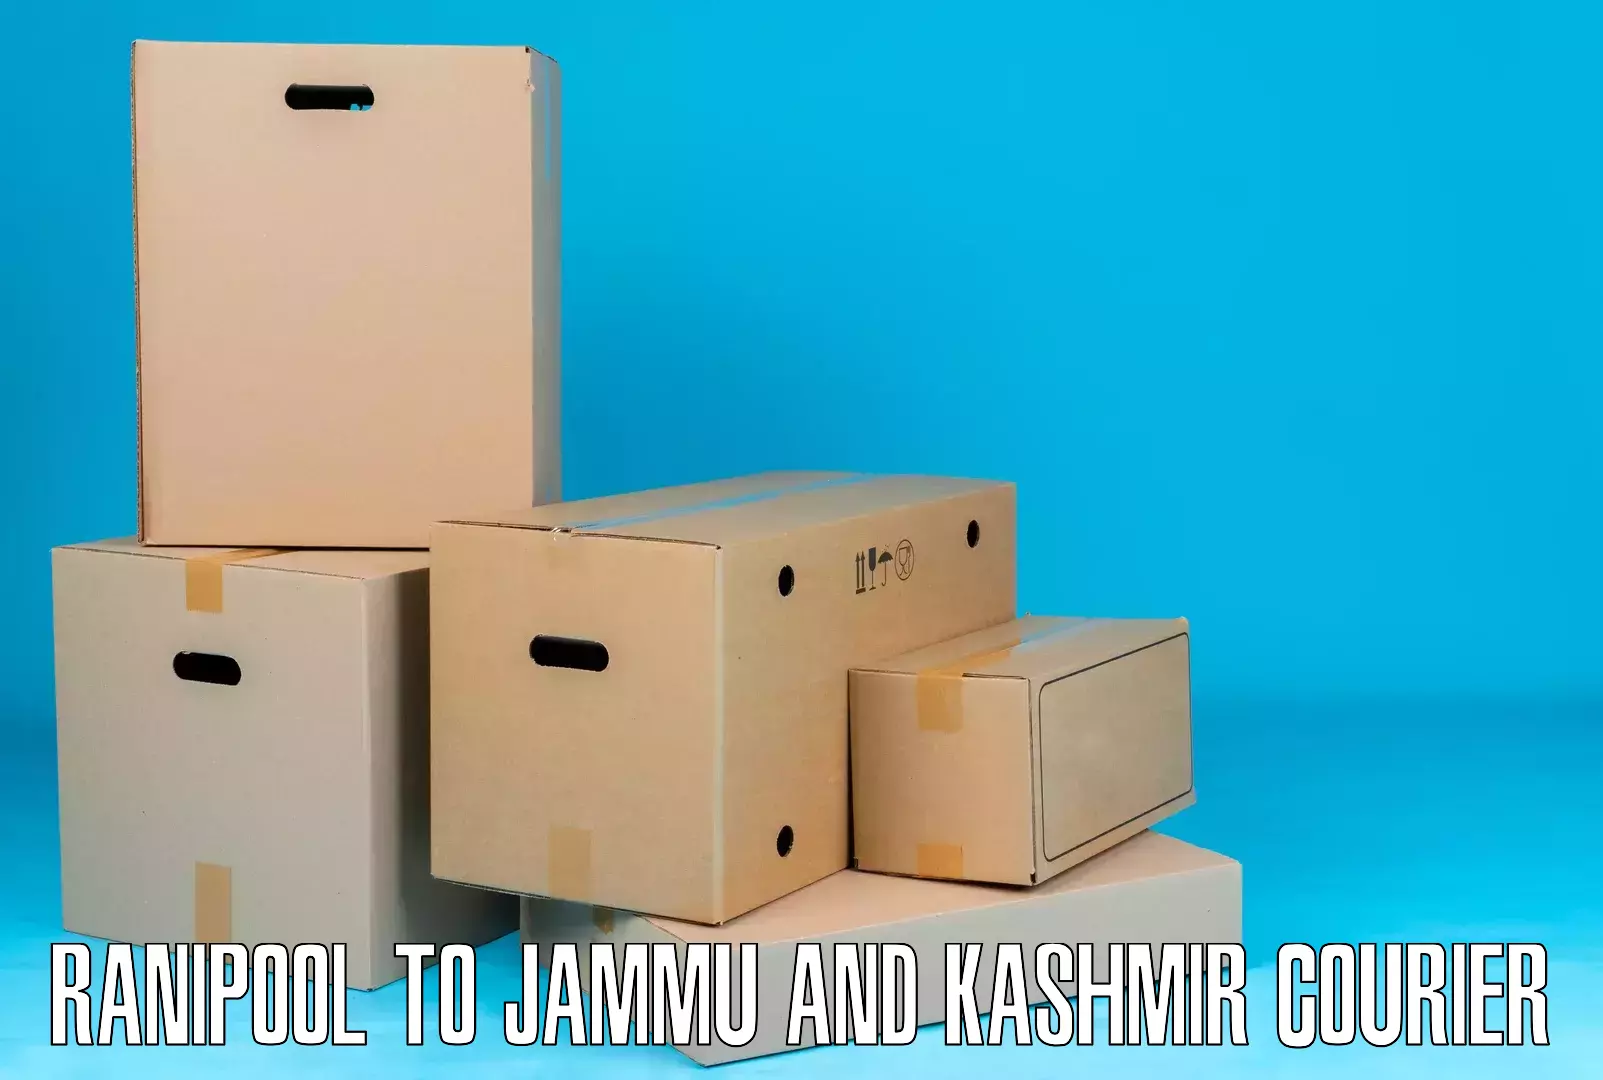 Cost-effective courier options Ranipool to Chenani